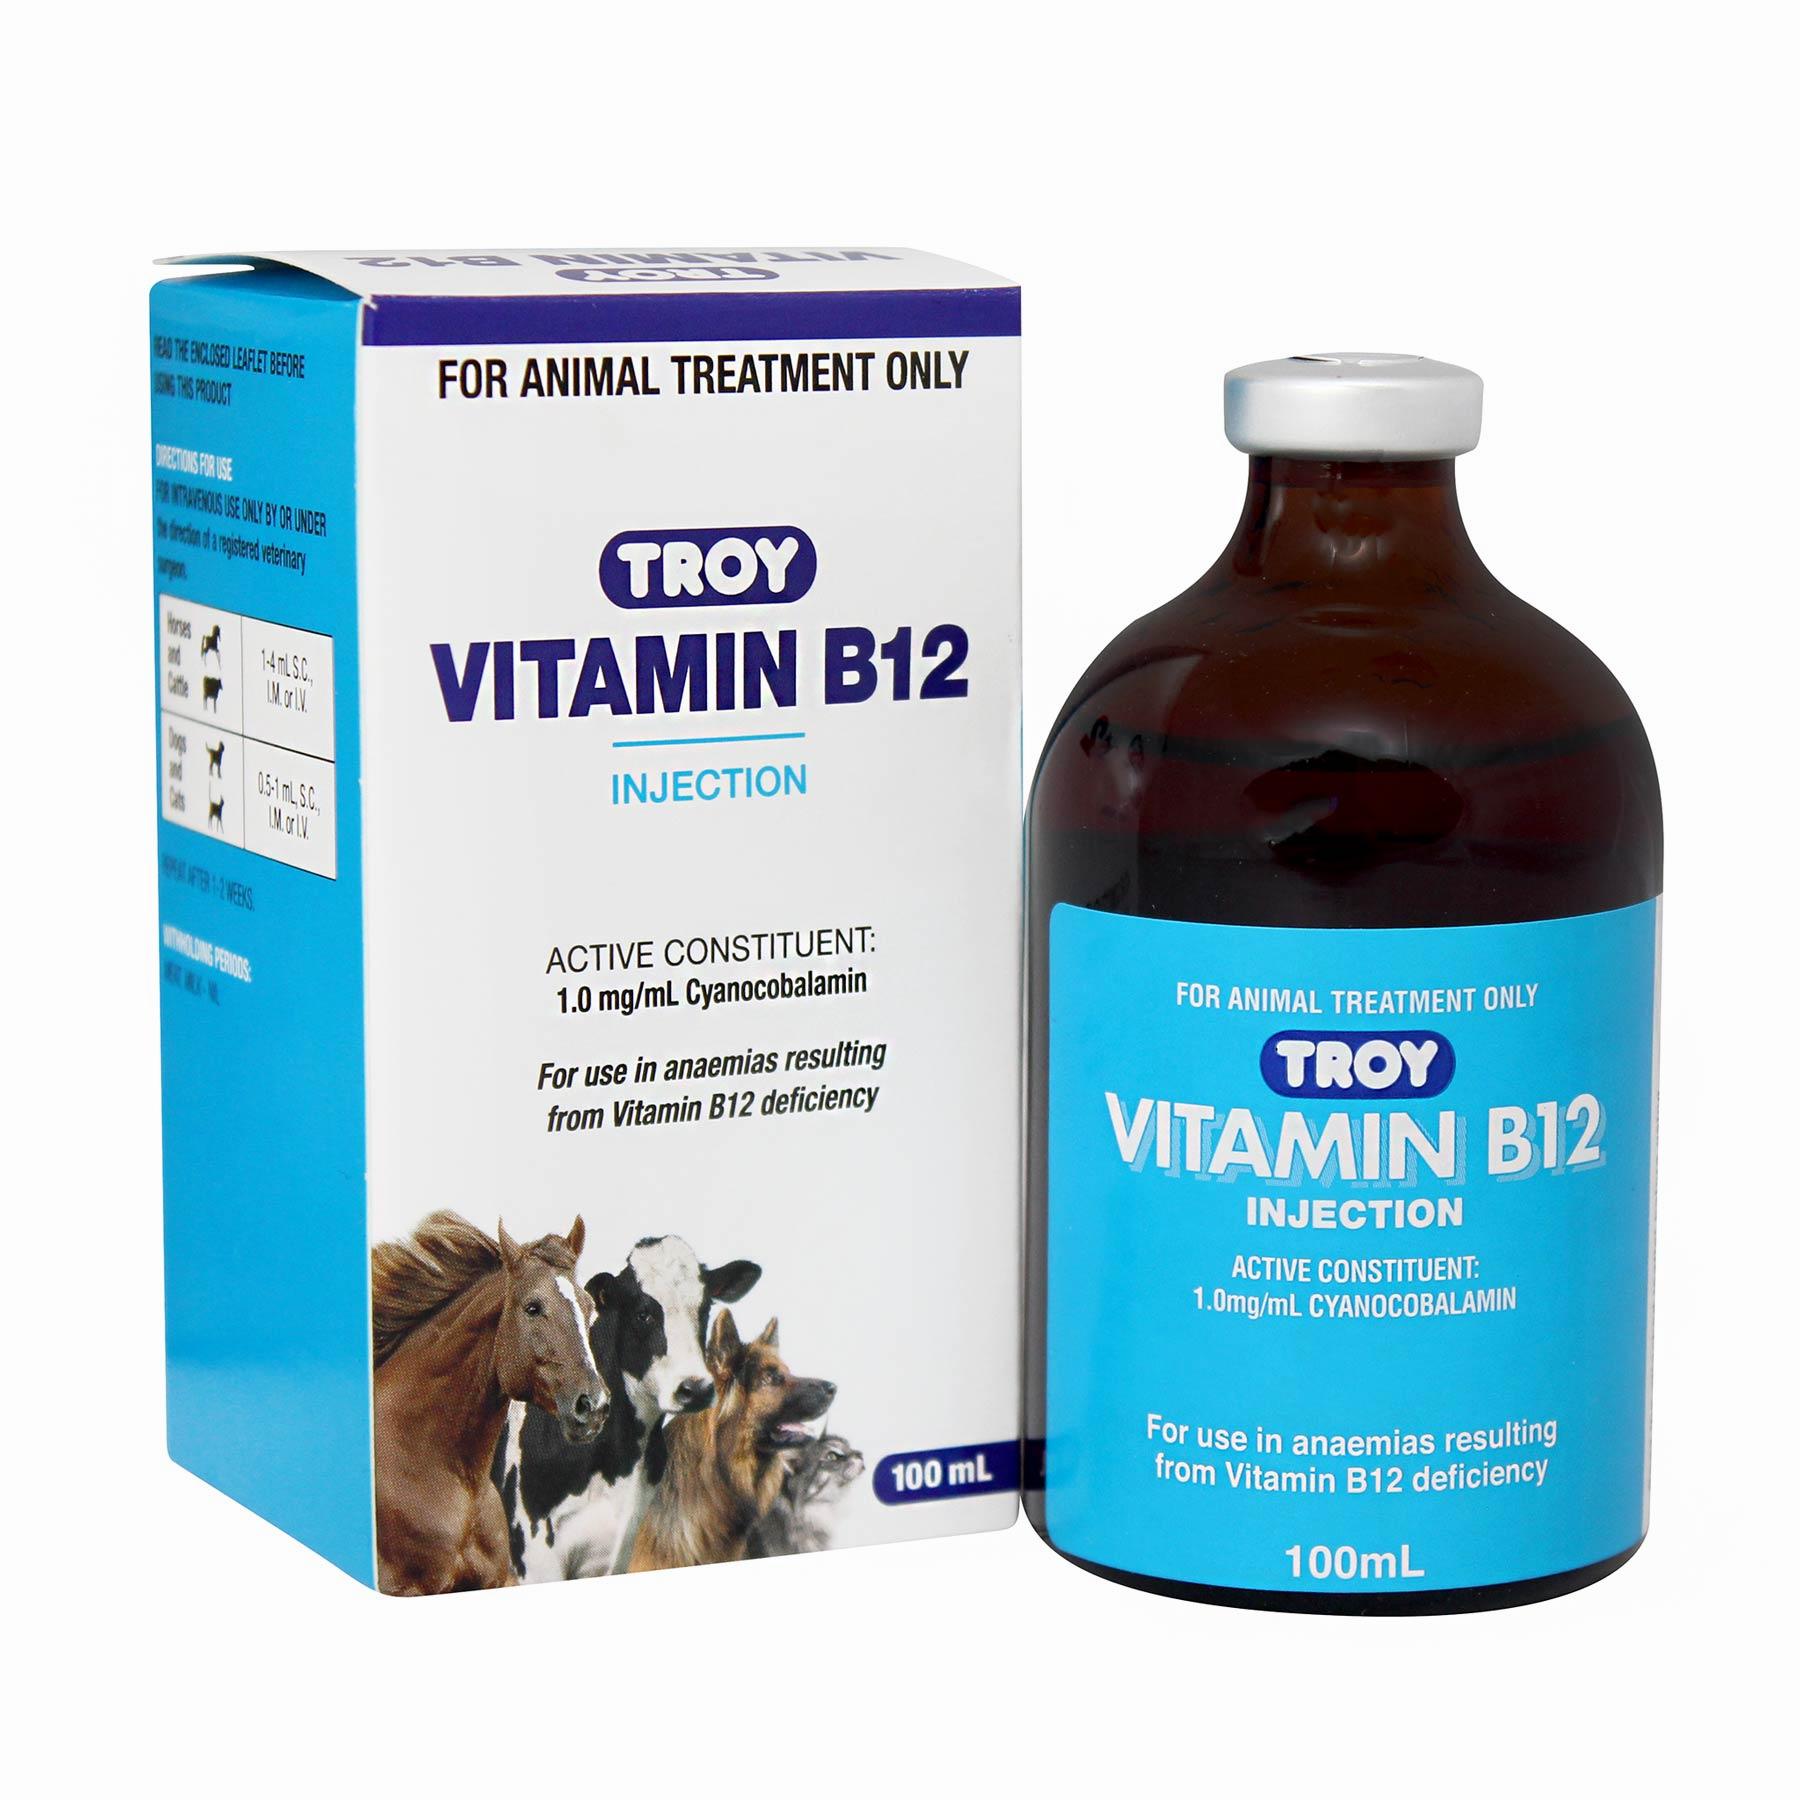 A brown glass vial of Troy Vitamin B12 injection, a treatment for anemia in animals, next to its packaging.